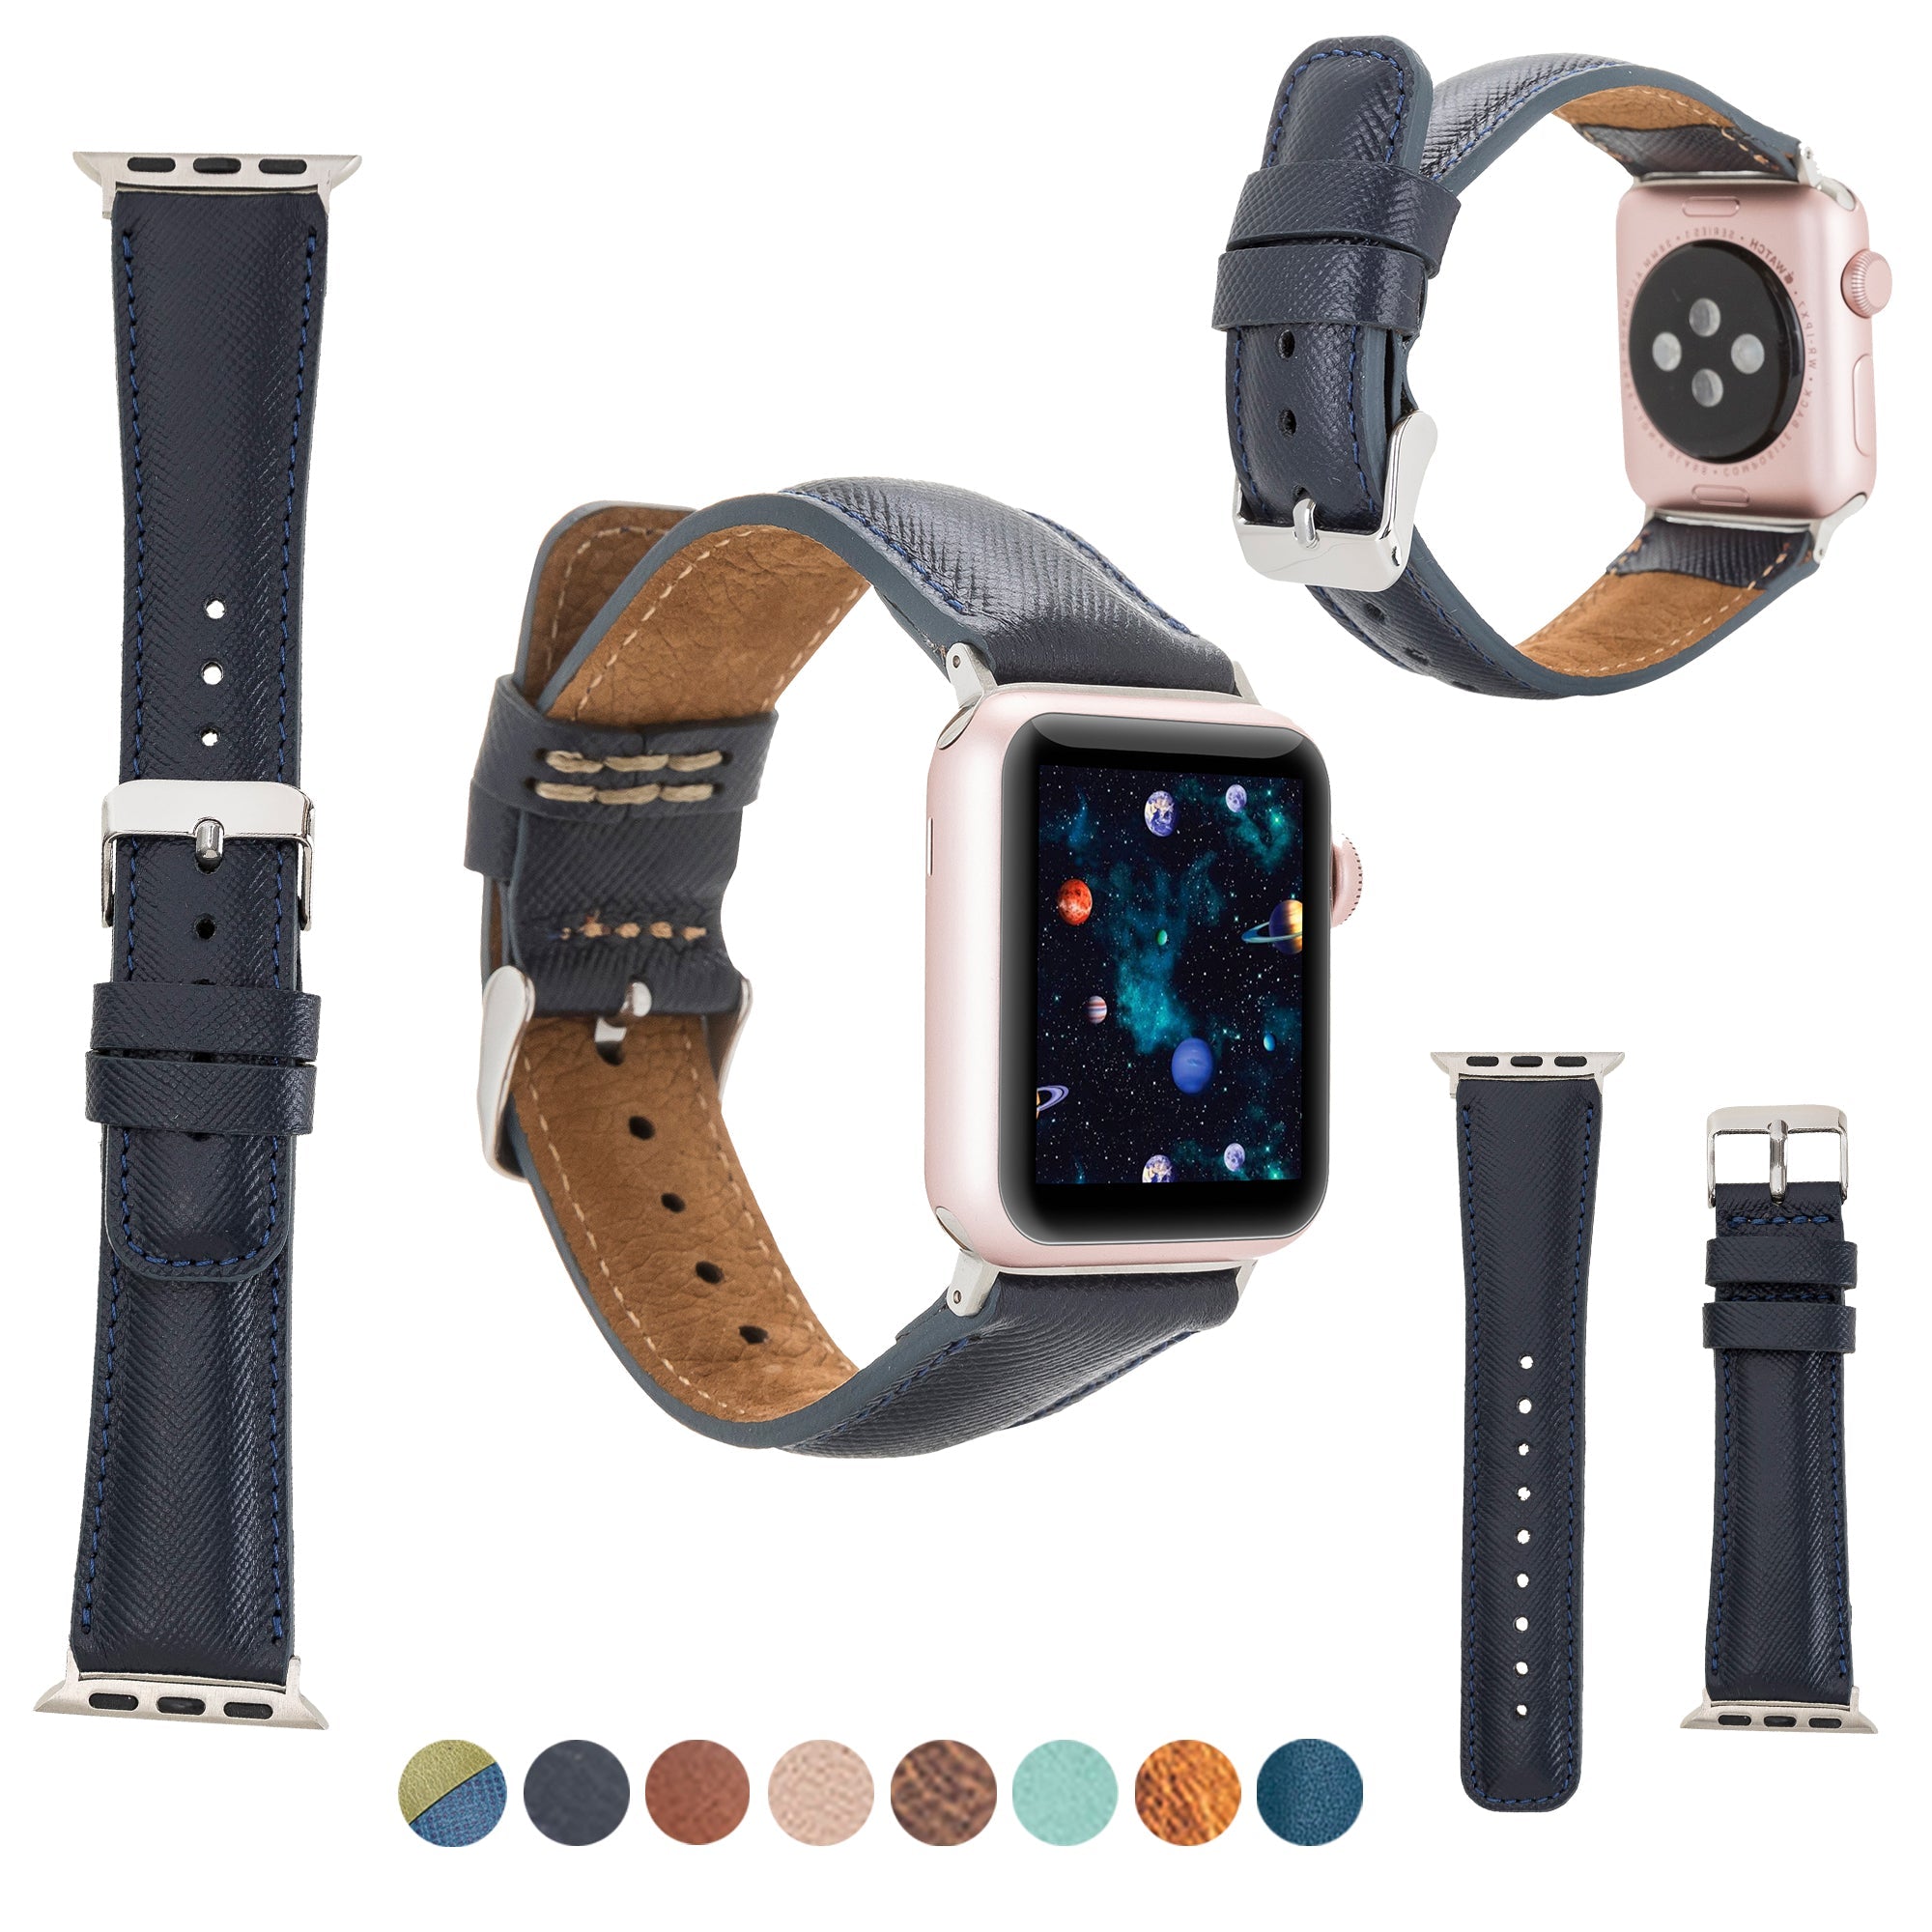 LupinnyLeather Liverpool Collection Leather Watch Band for Apple & Fitbit Versa Watch Band 76